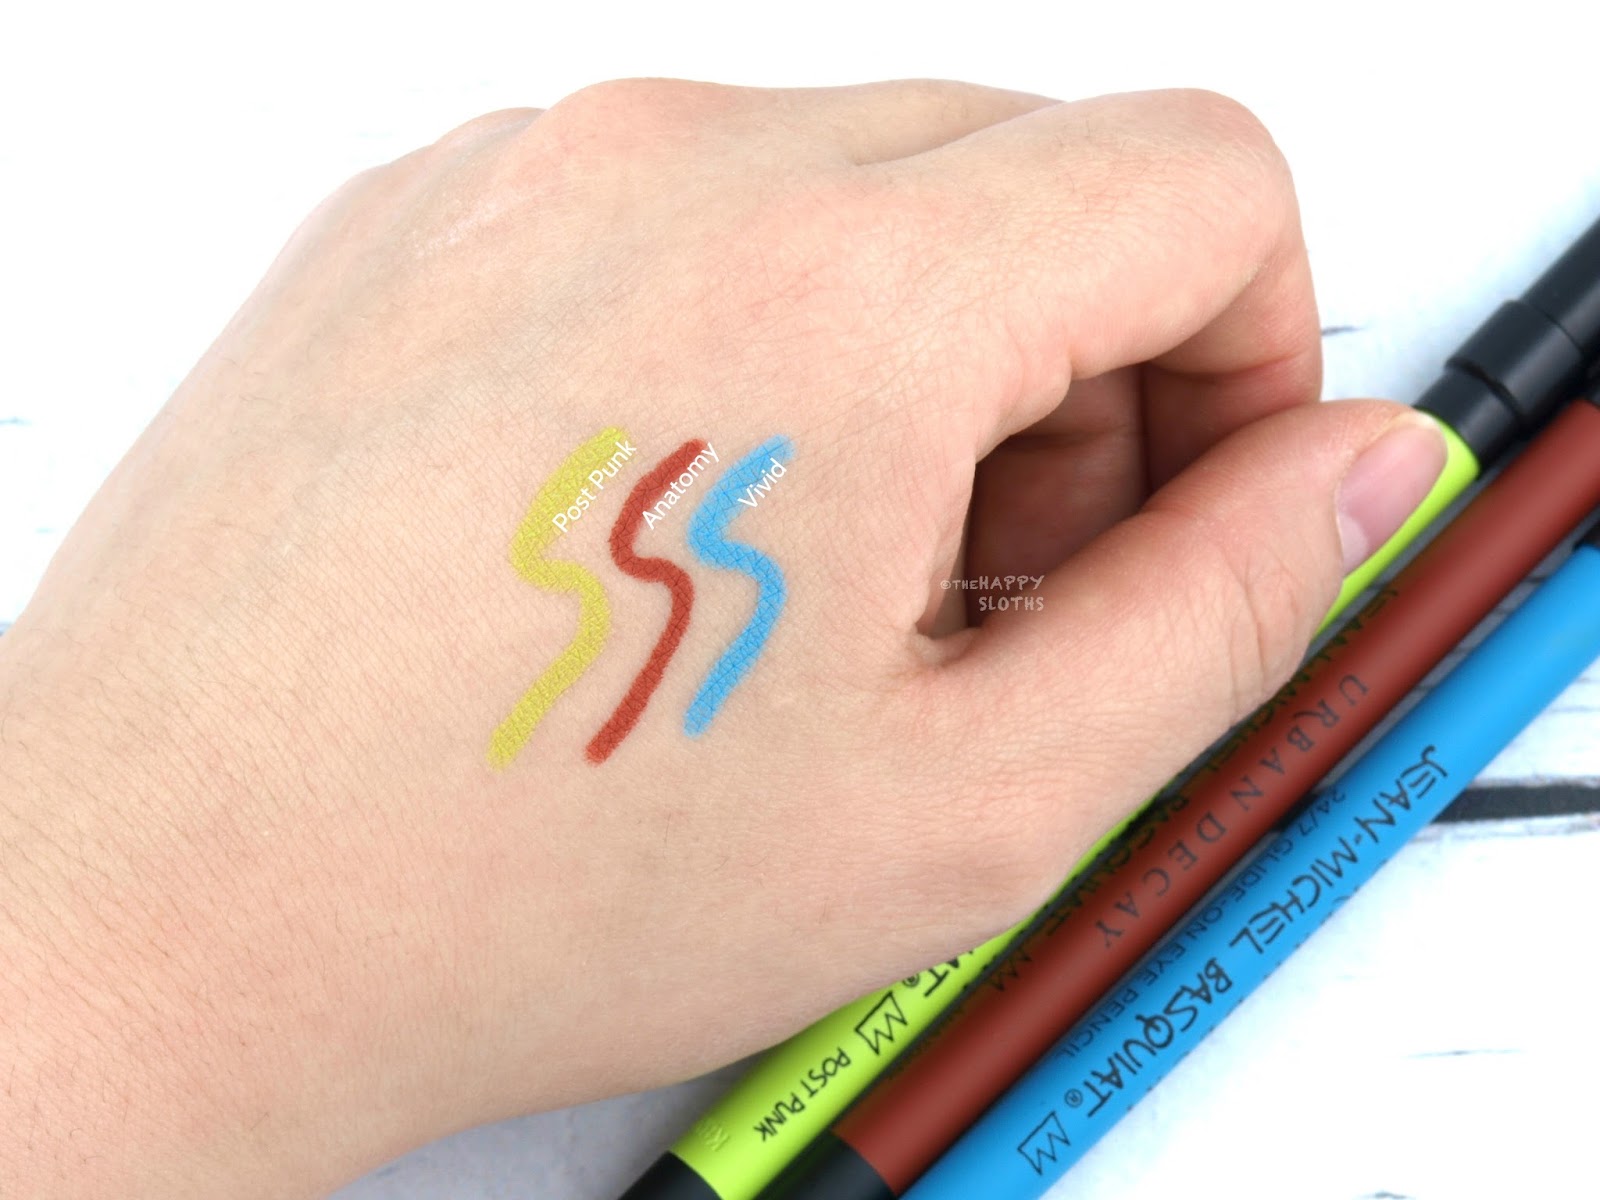 Urban Decay x Basquiat Collection | 24/7 Glide-On Eye Pencil: Review and Swatches